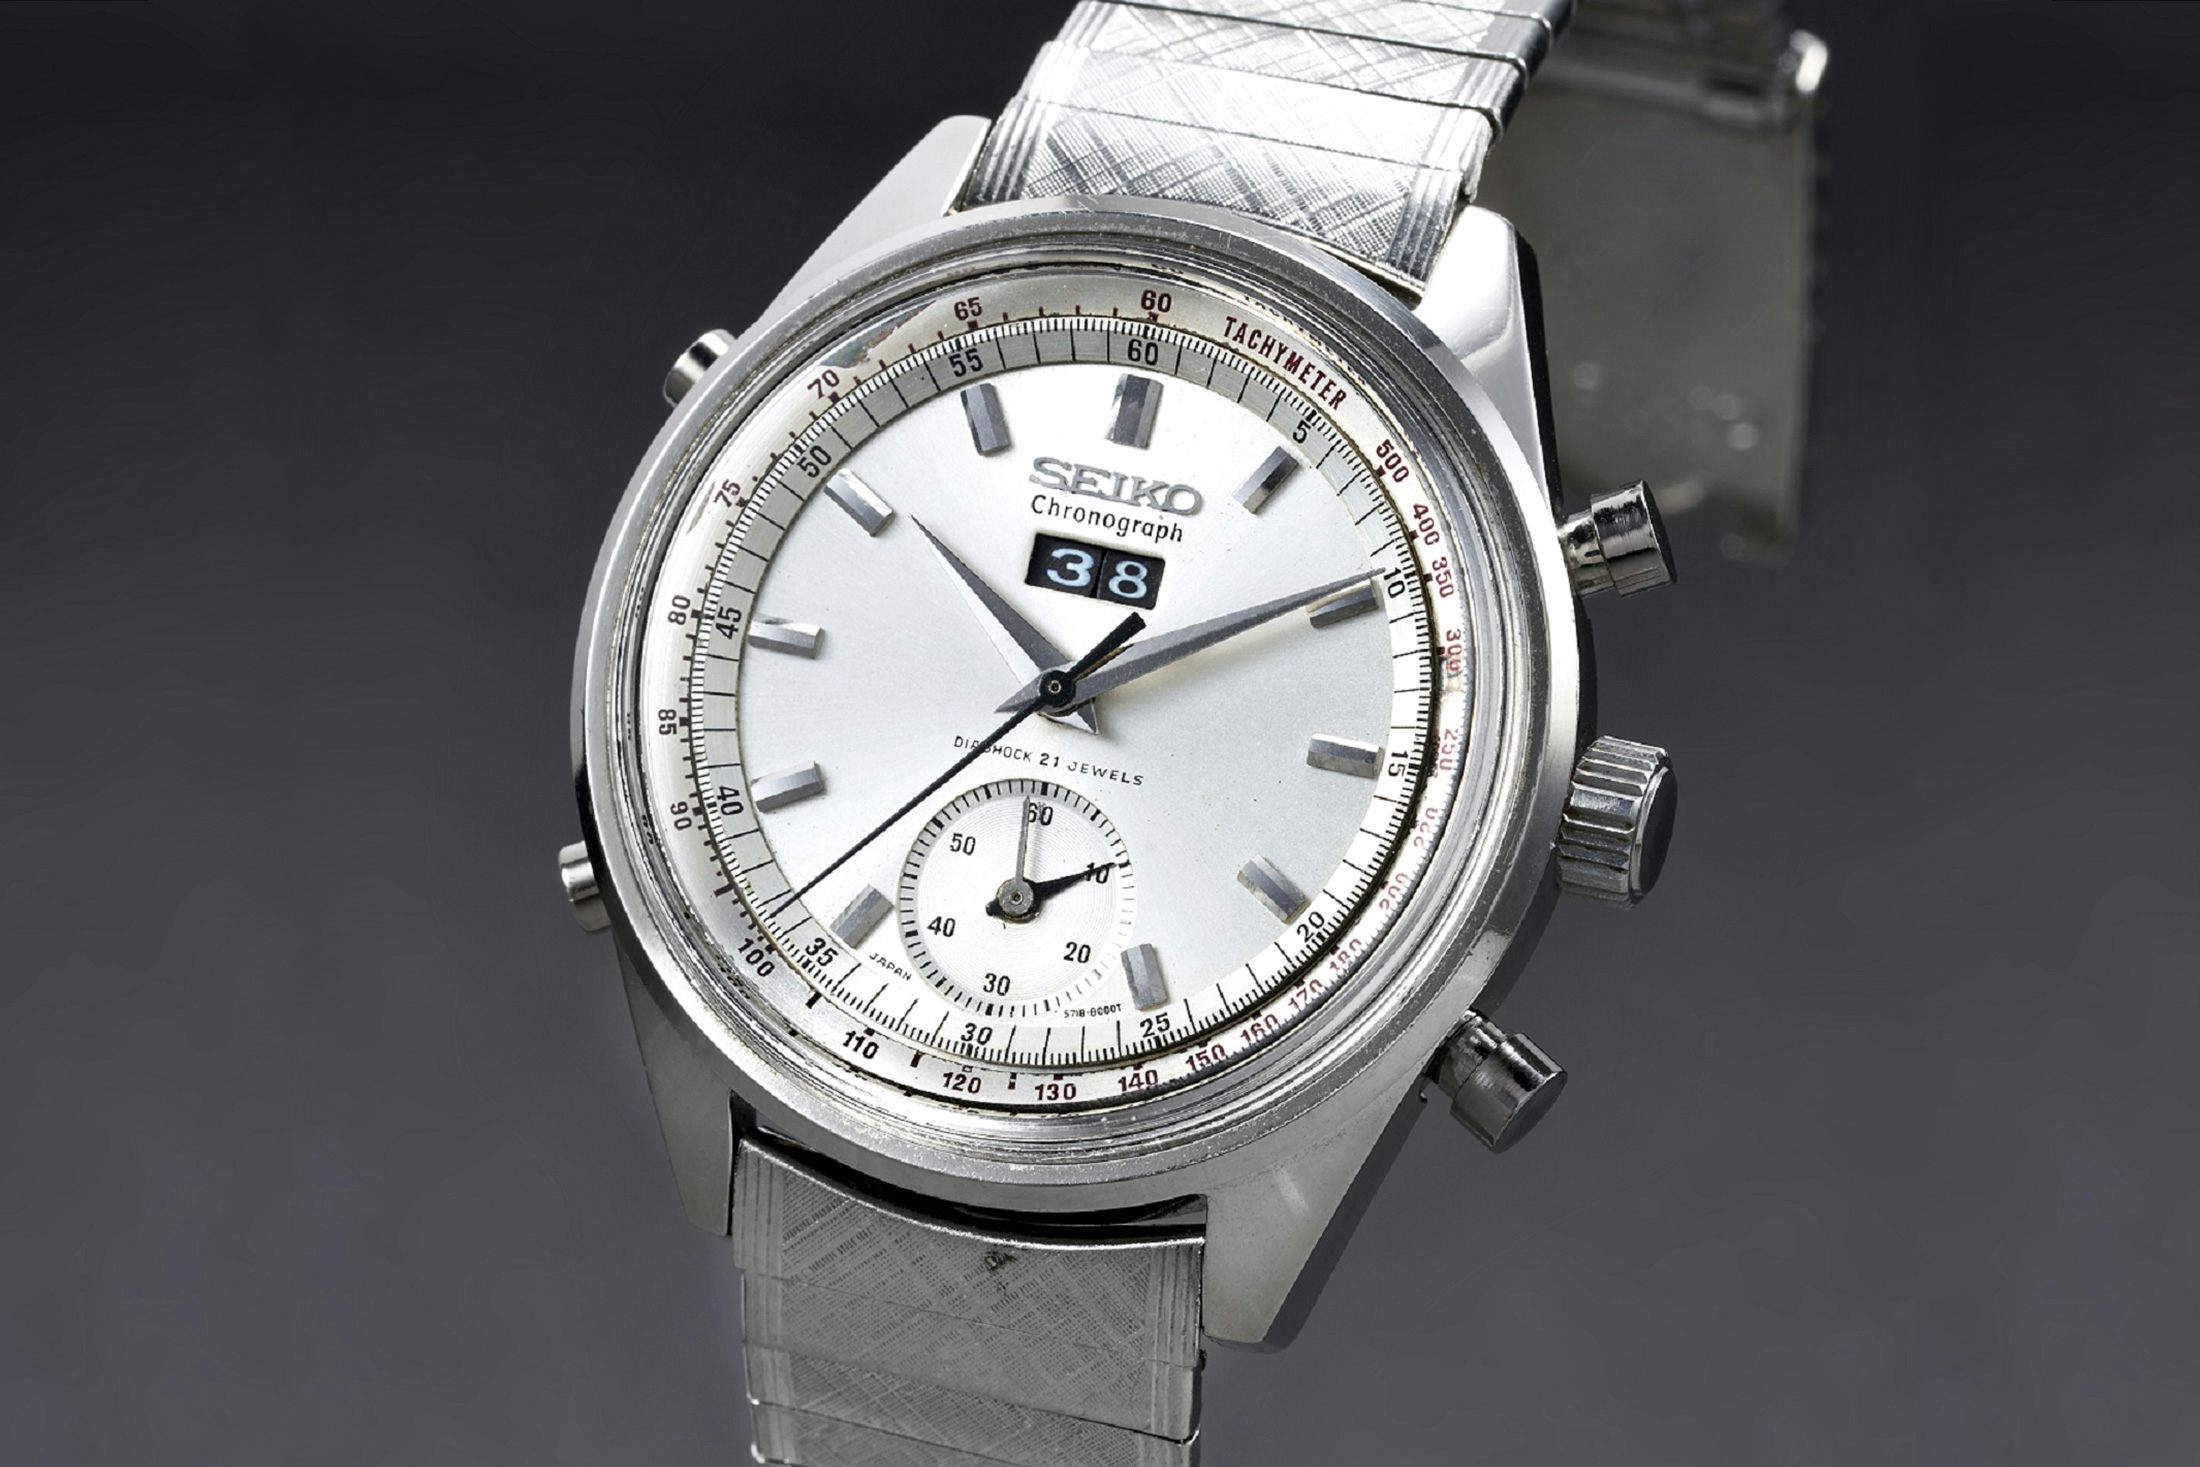 Breaking News: Bonhams Seiko-Only 'Making Waves' Auction Not Canceled  (Updated) - Hodinkee